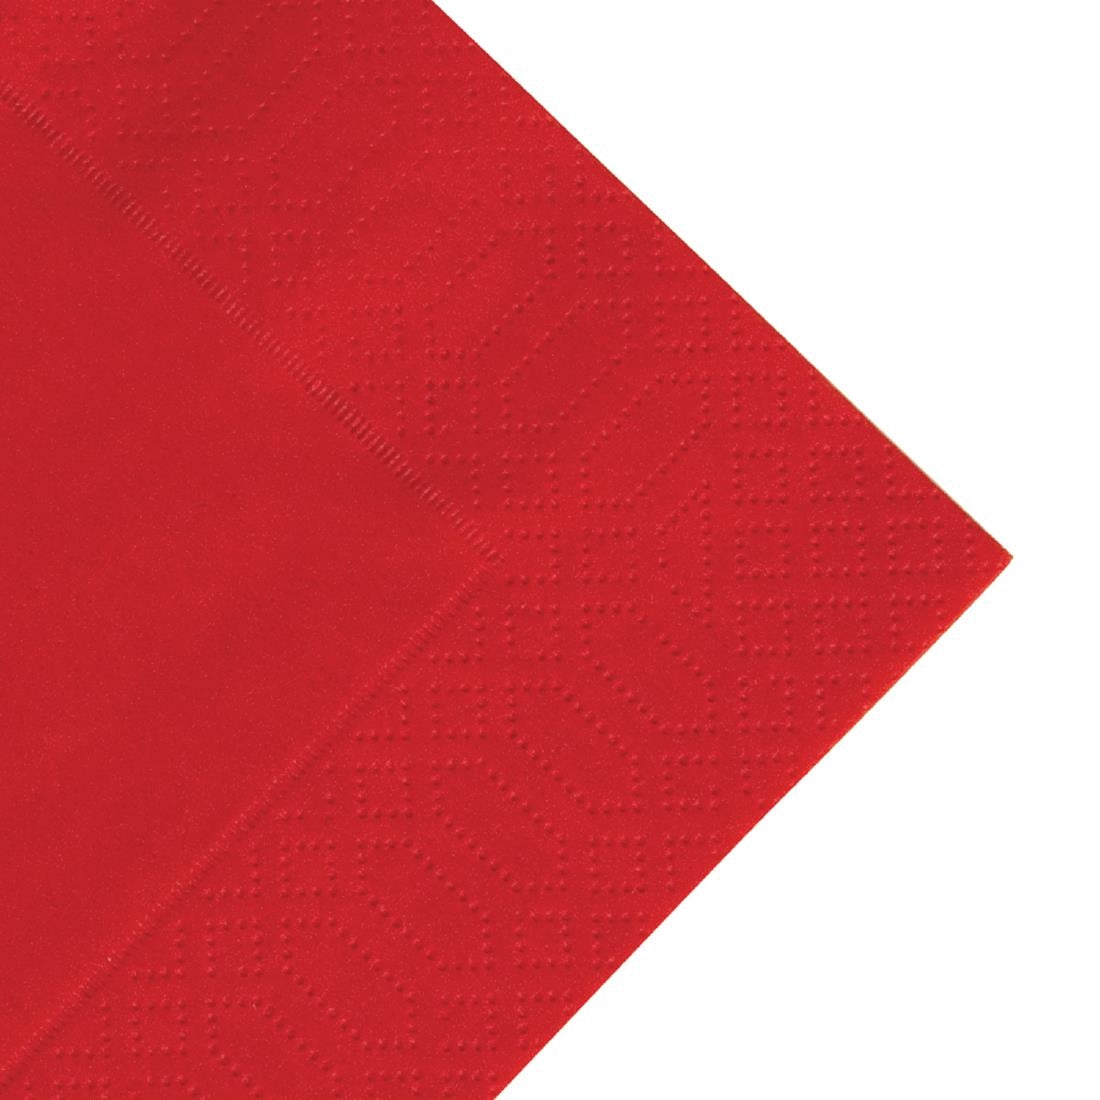 GJ104 Duni Lunch Napkin Red 33x33cm 3ply 1/4 Fold (Pack of 1000) JD Catering Equipment Solutions Ltd